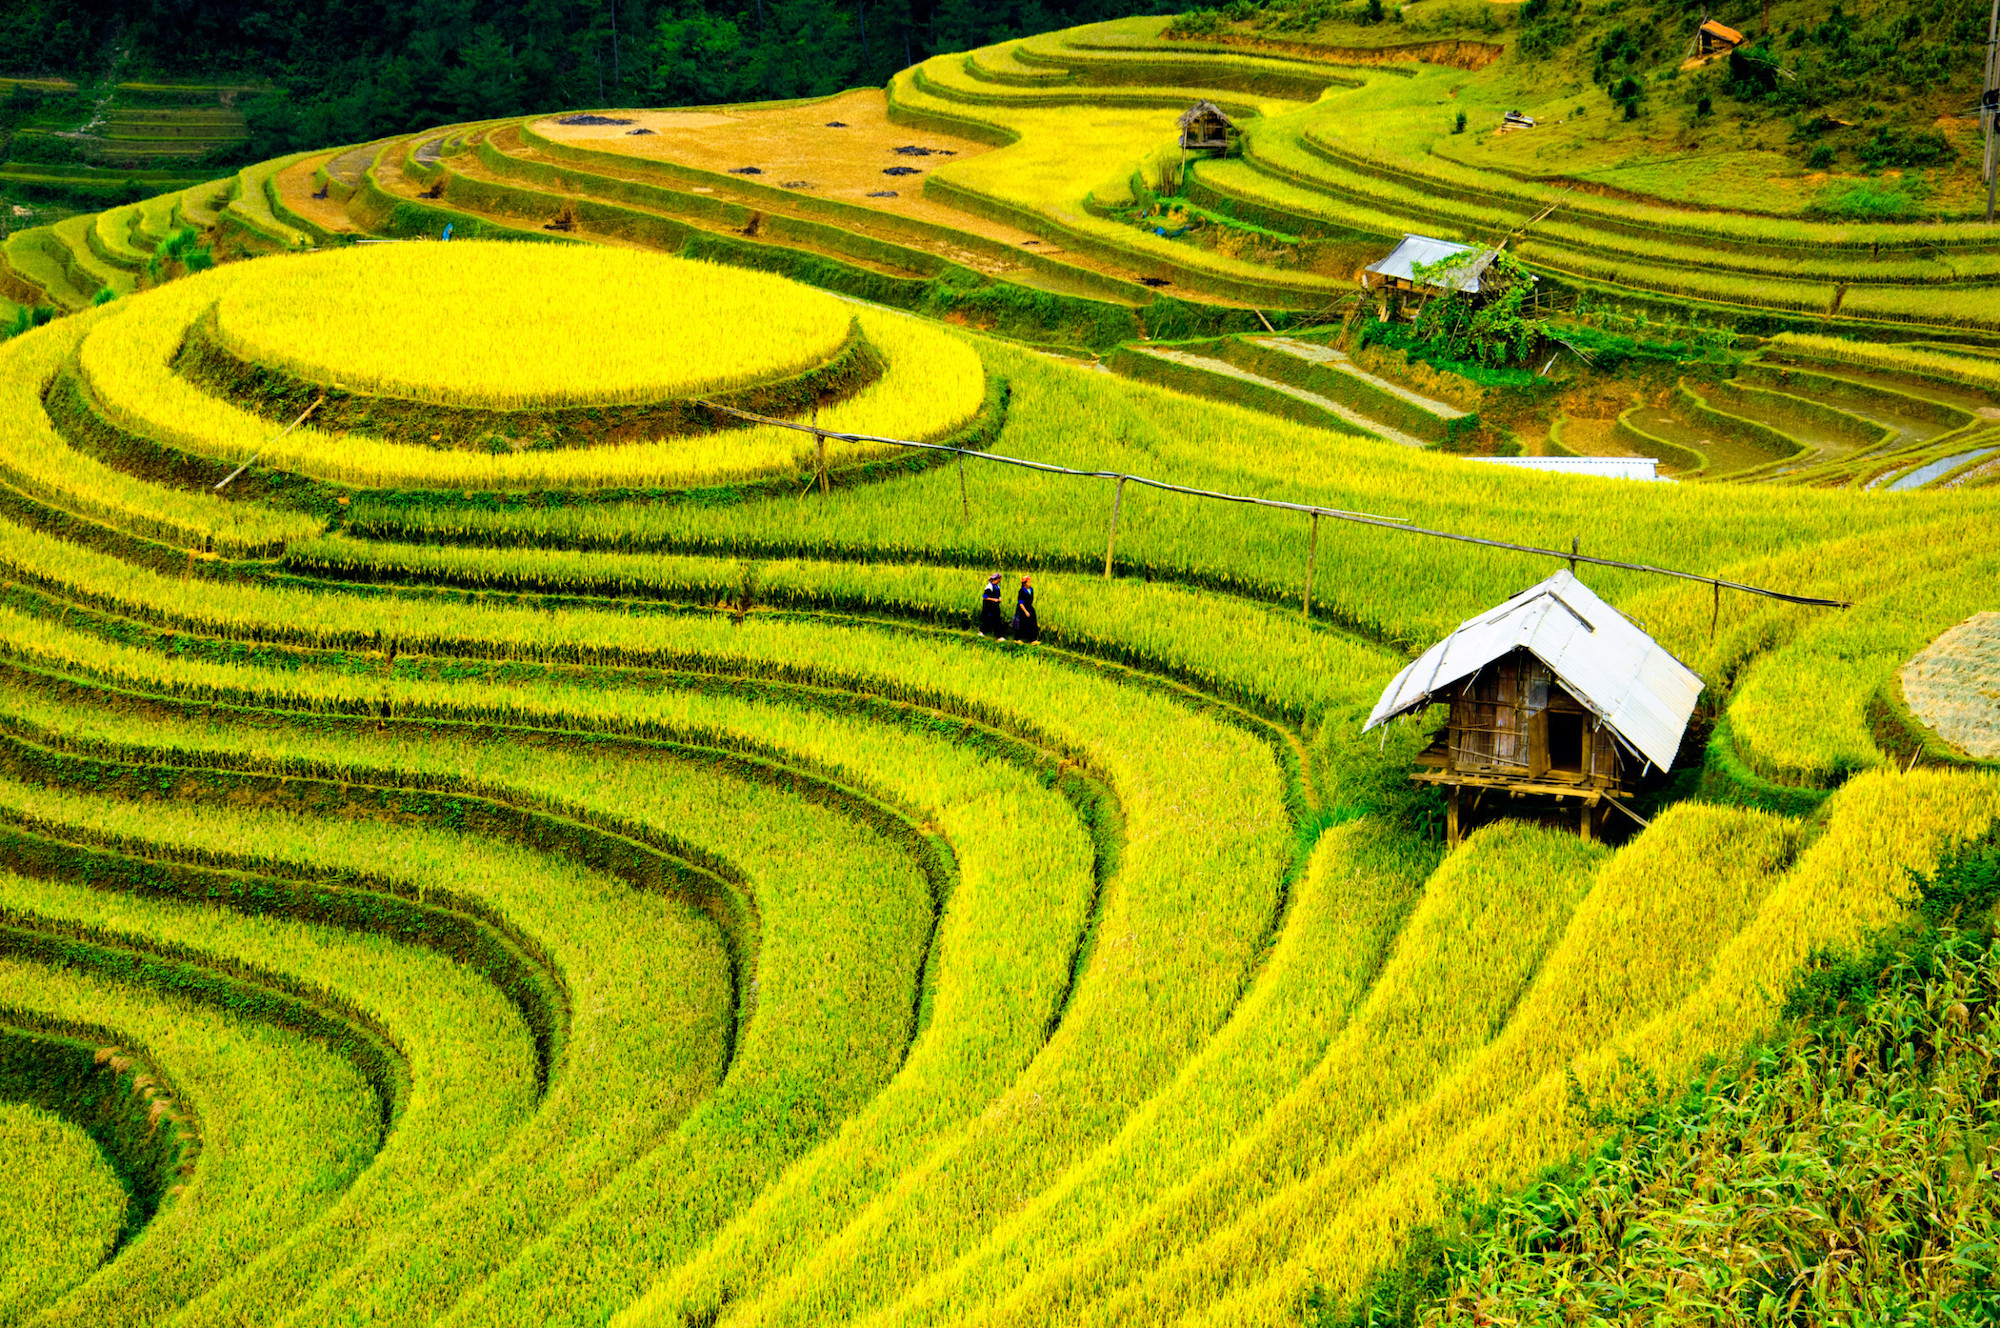 Autumn is best time to see golden rice terraces north vietnam